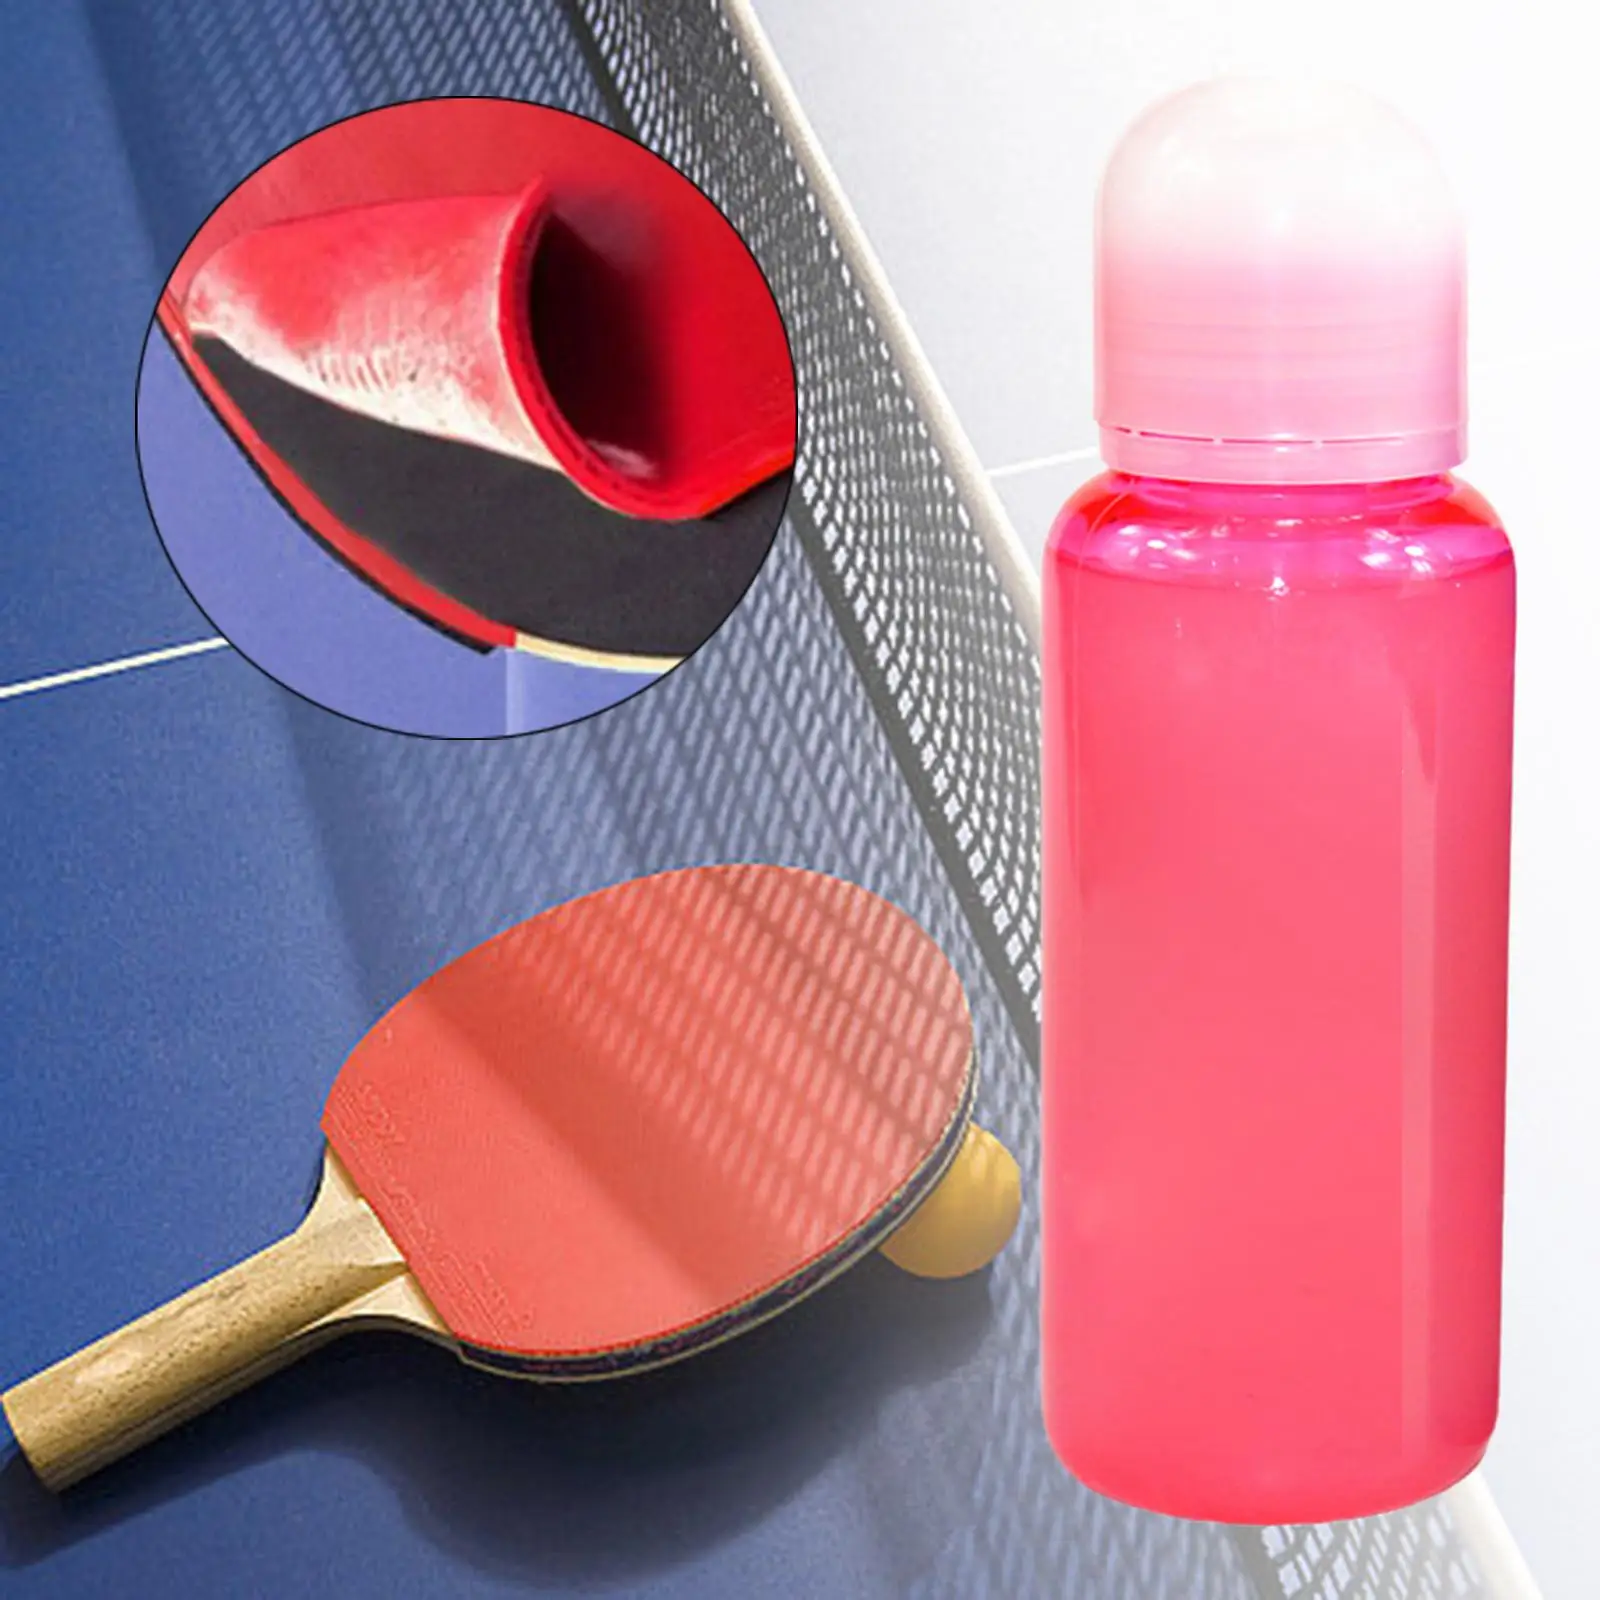 250ml Speed Glue Durable Pingpong Paddles Glue for Paddle Faster Speed DIY Pingpong Racket Table Tennis Rackets Glue